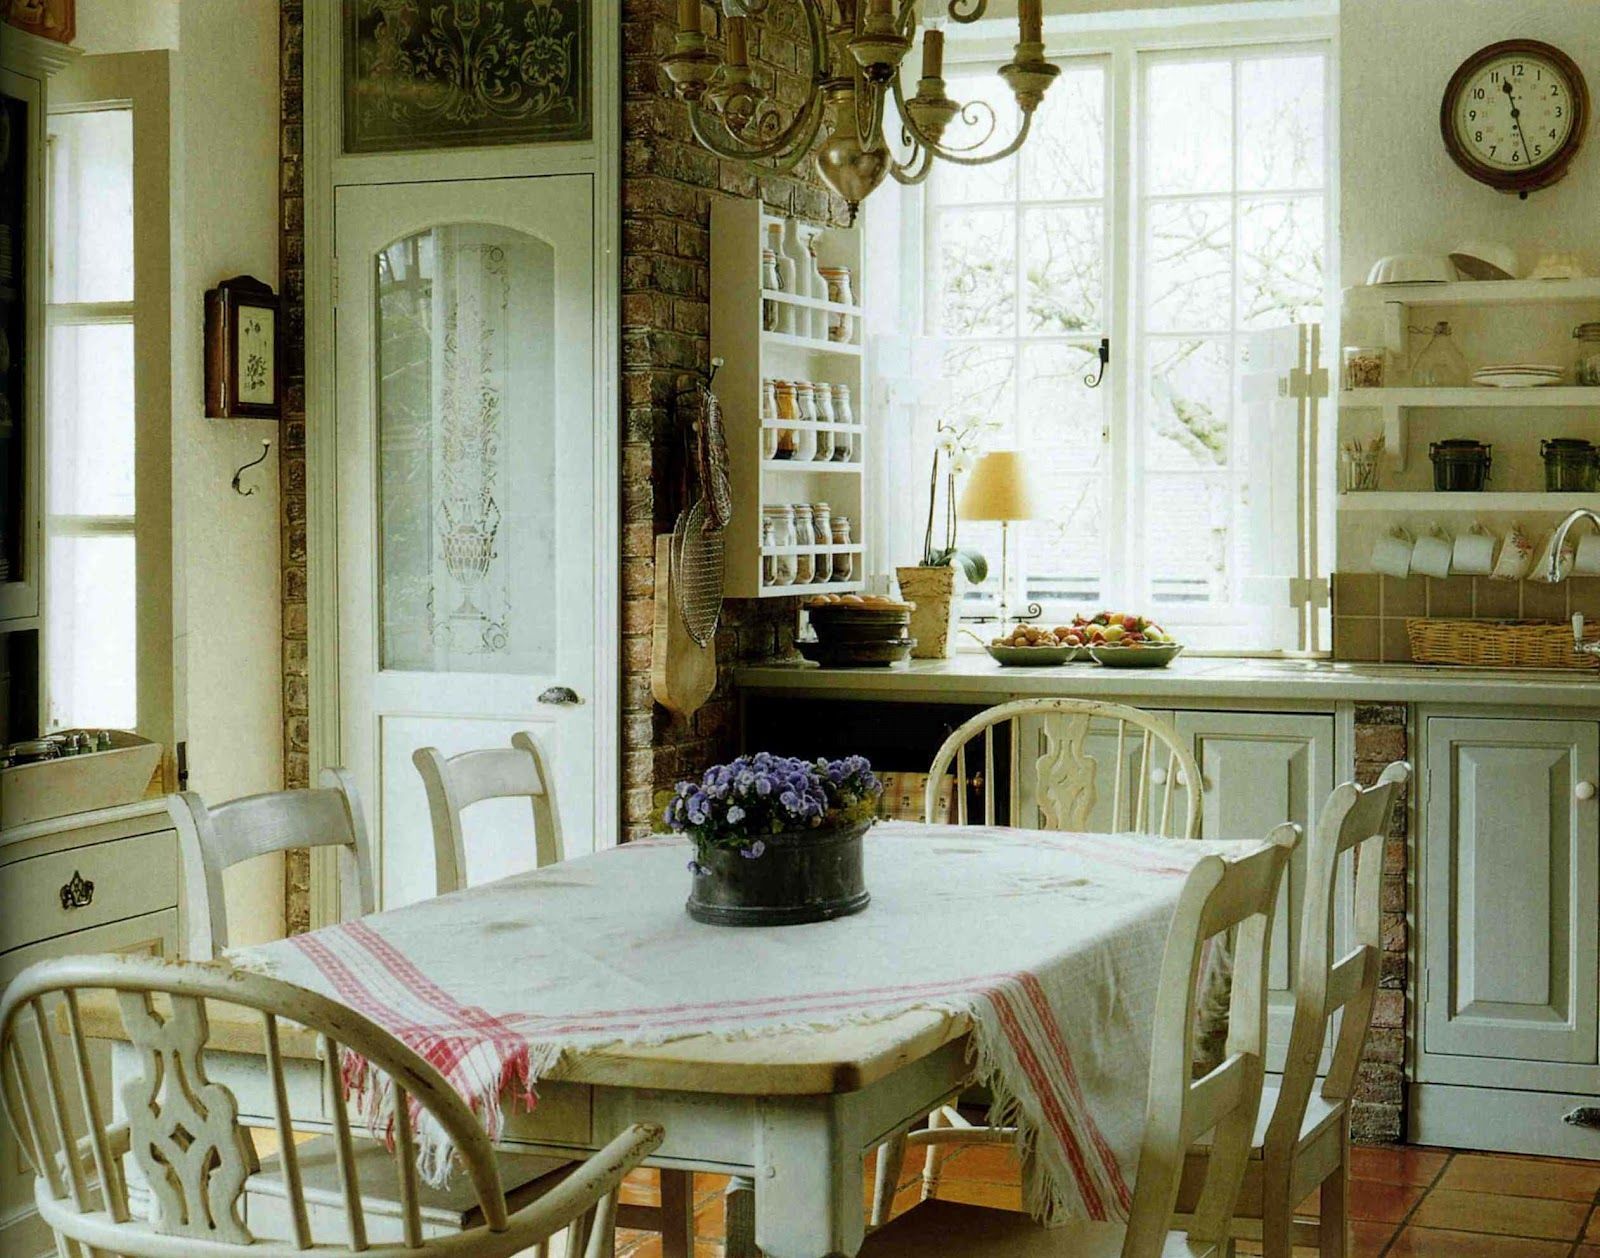 English Home magazine. Suspiciously like the kitchen in Lionels country home in the British TV show “As TIme Goes